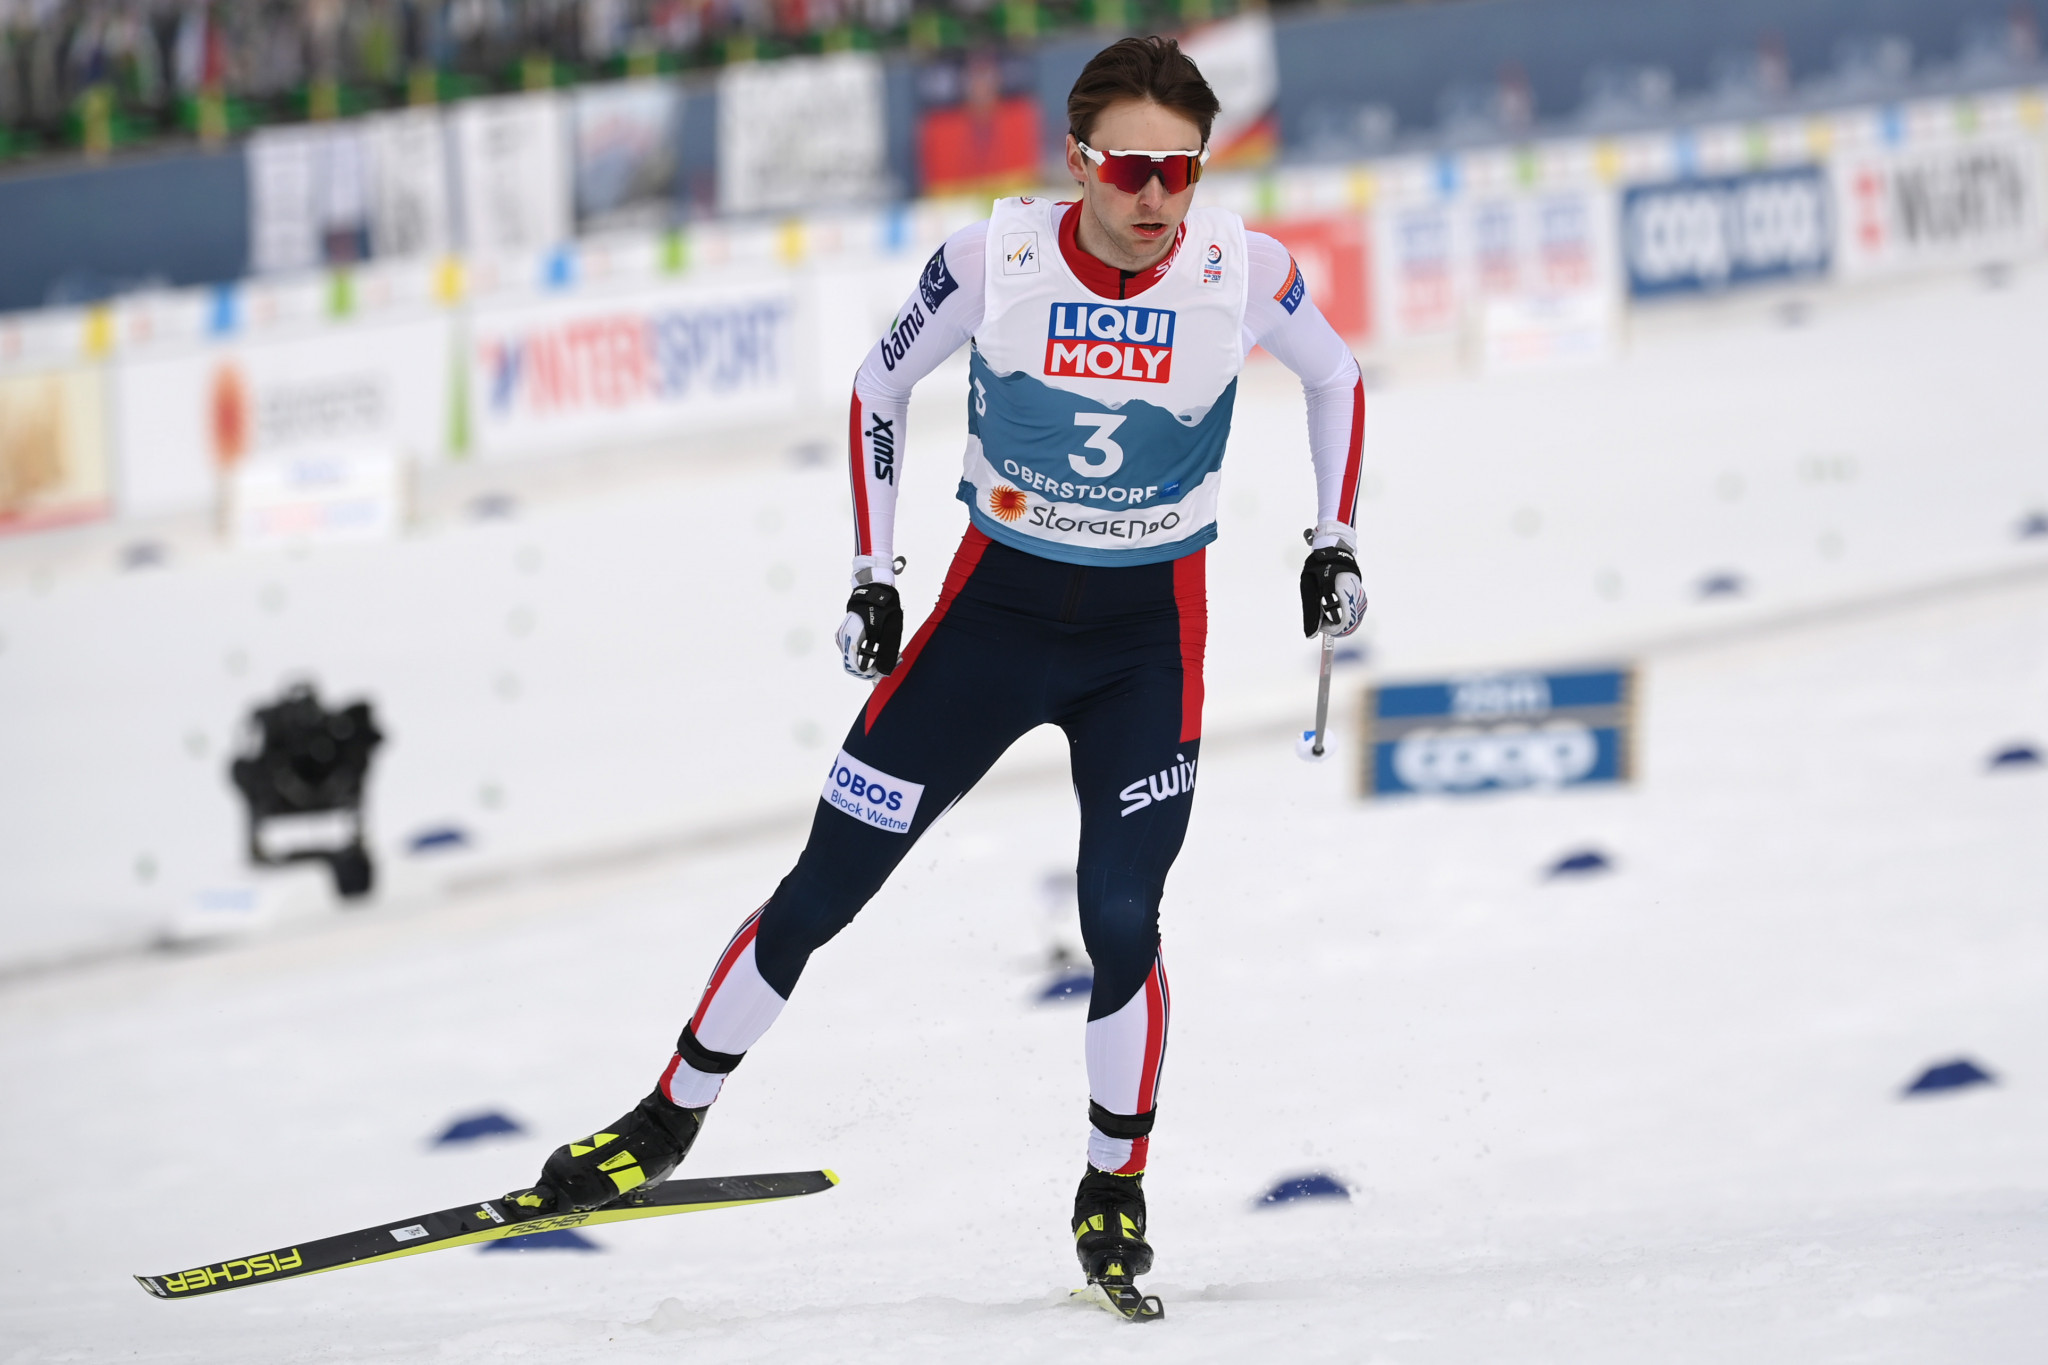 Riiber looking to capitalise on home comforts at FIS Nordic Combined World Cup